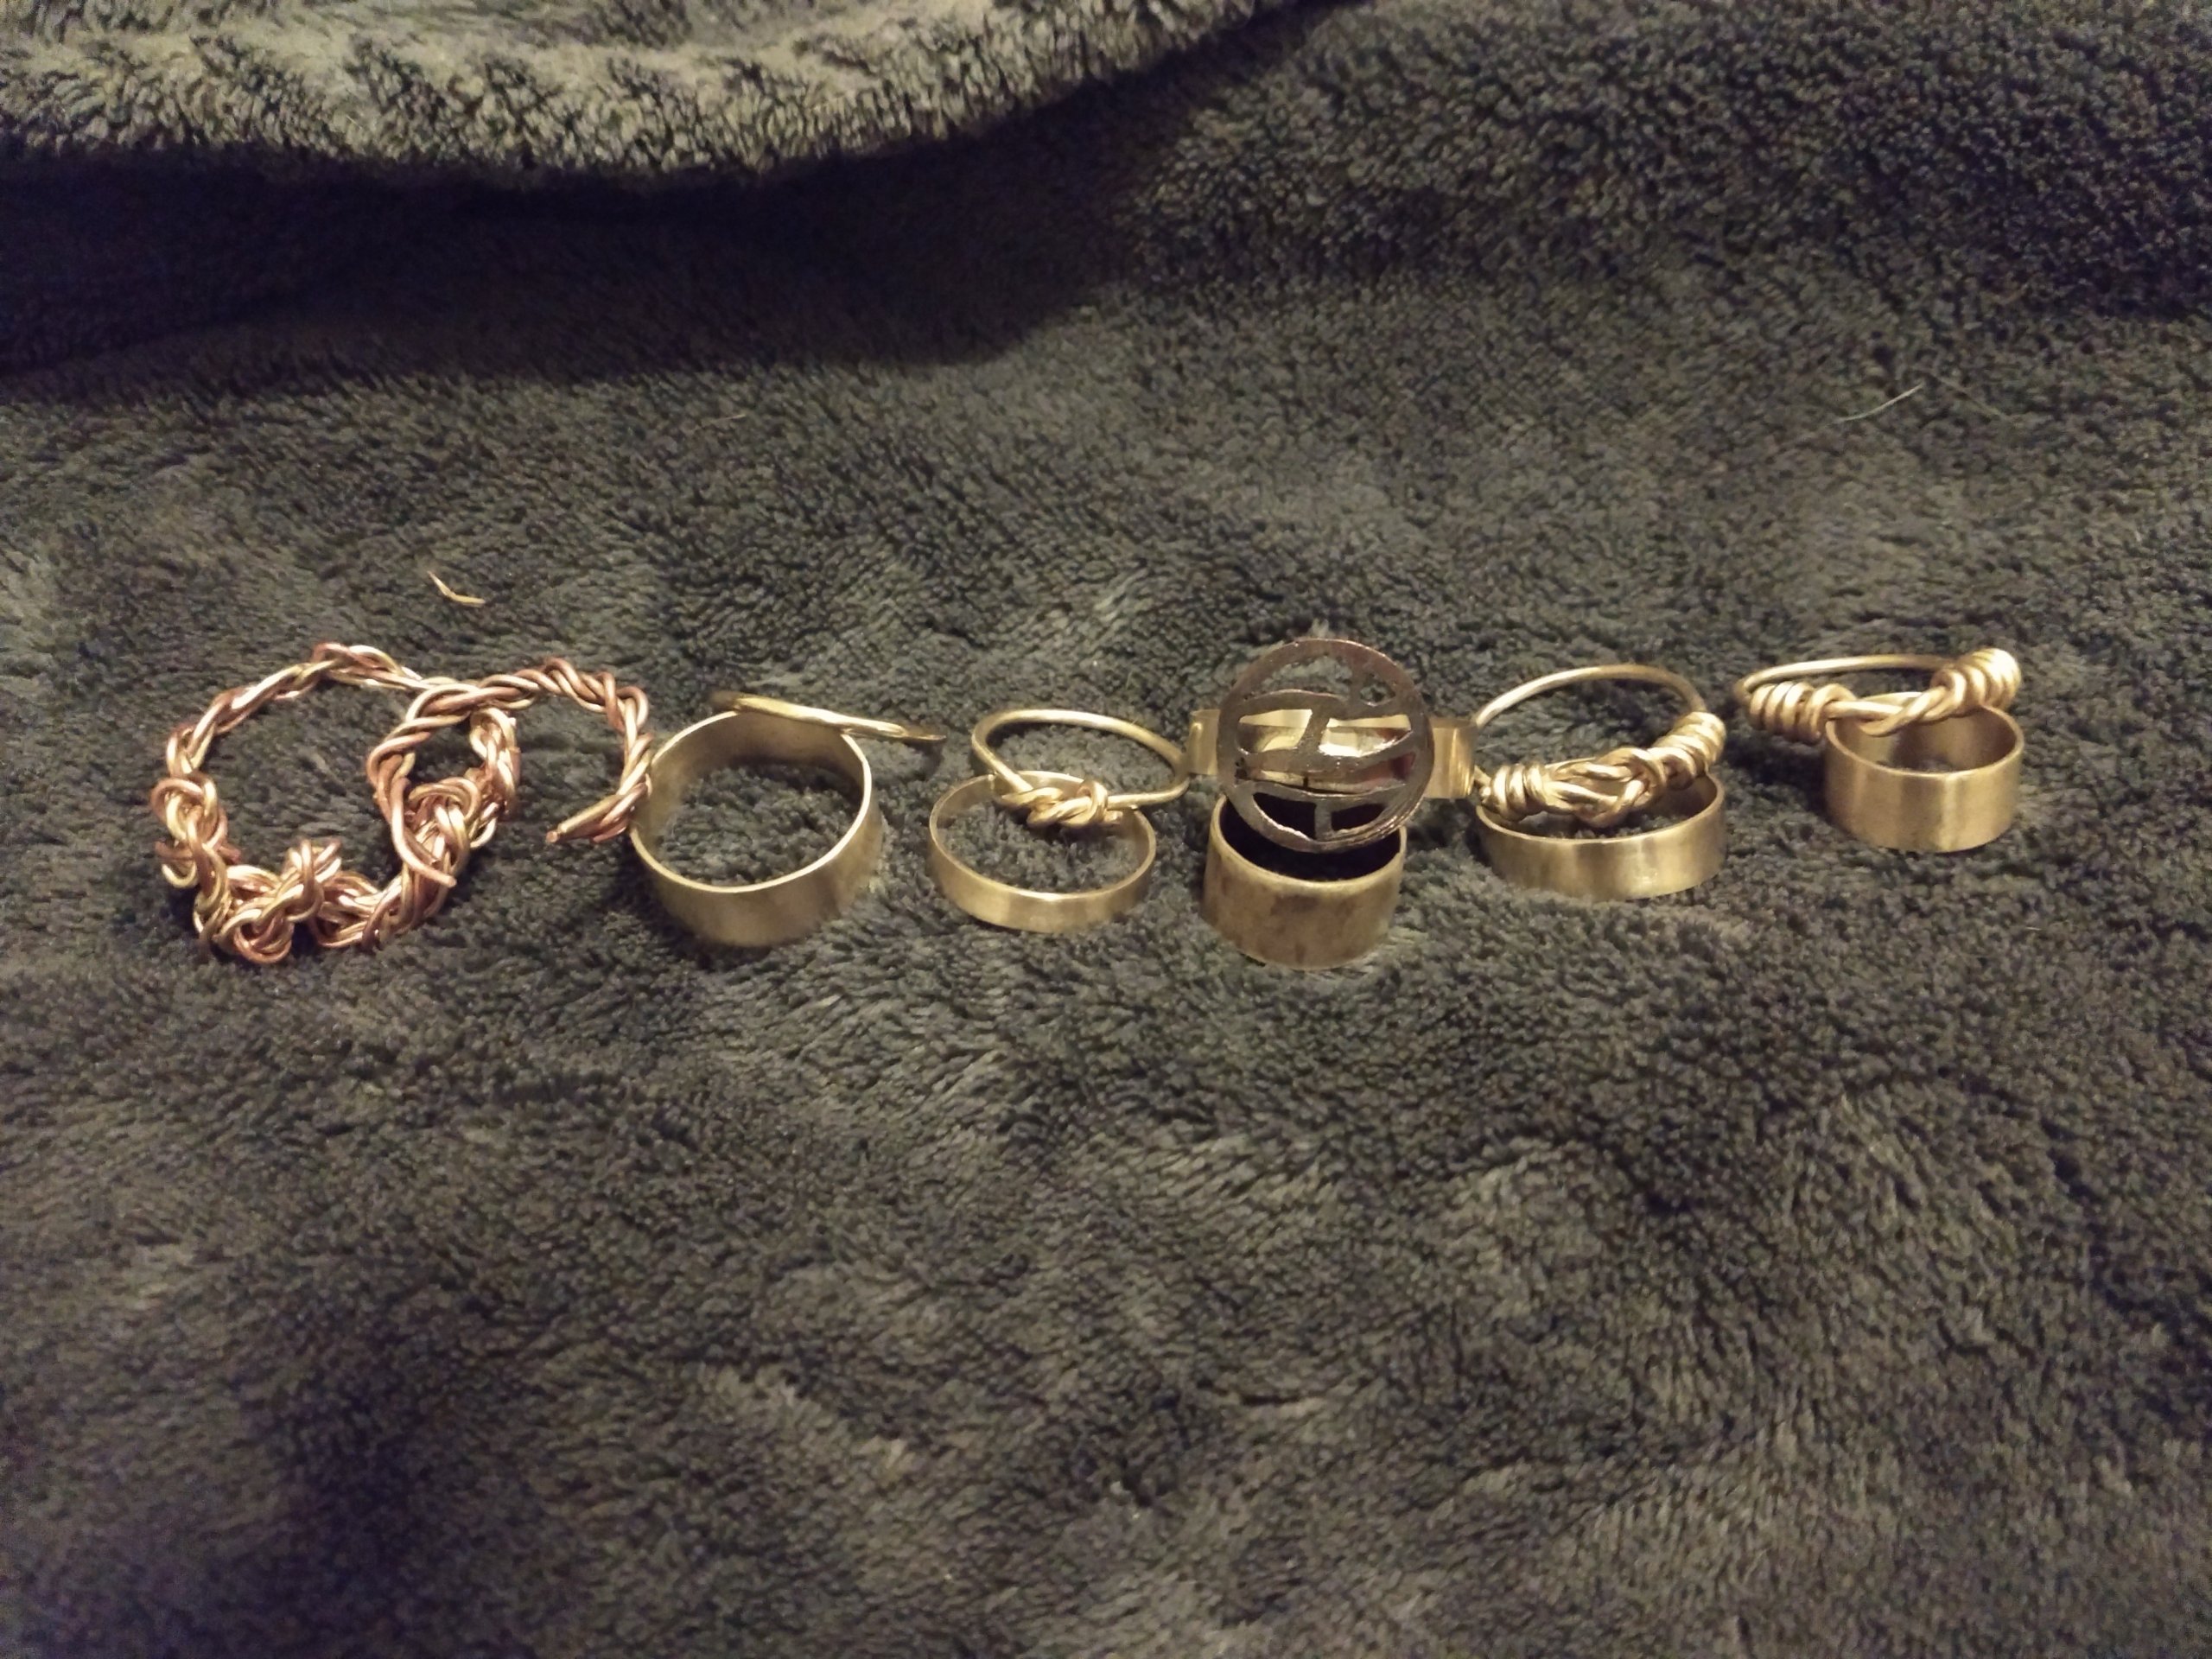 All the rings